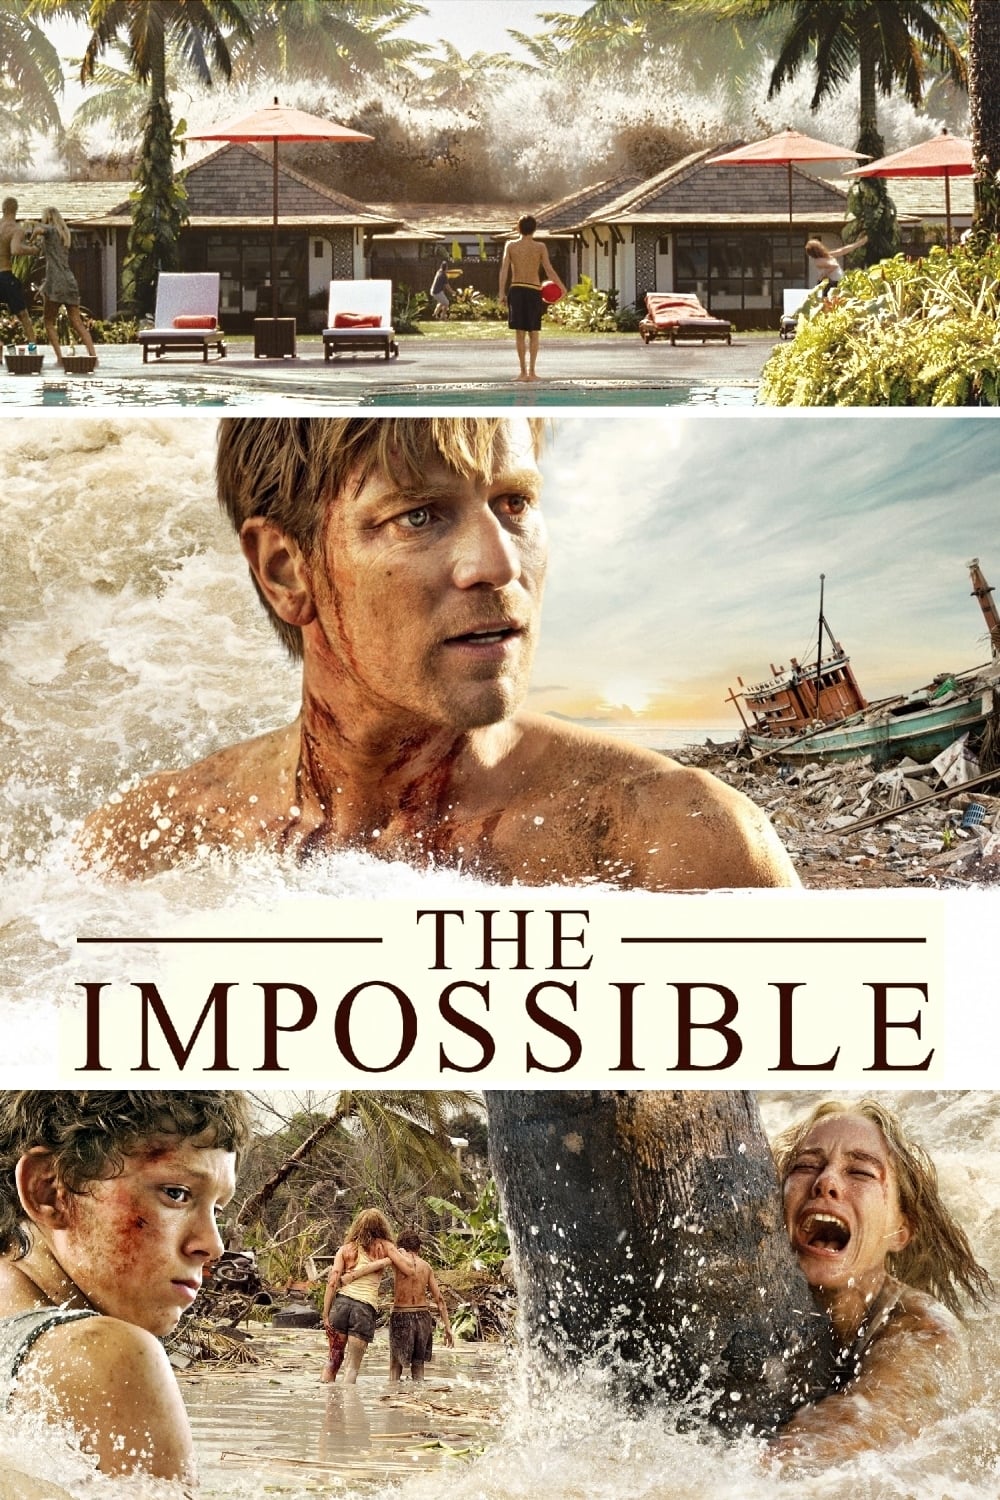 the impossible movie torrent